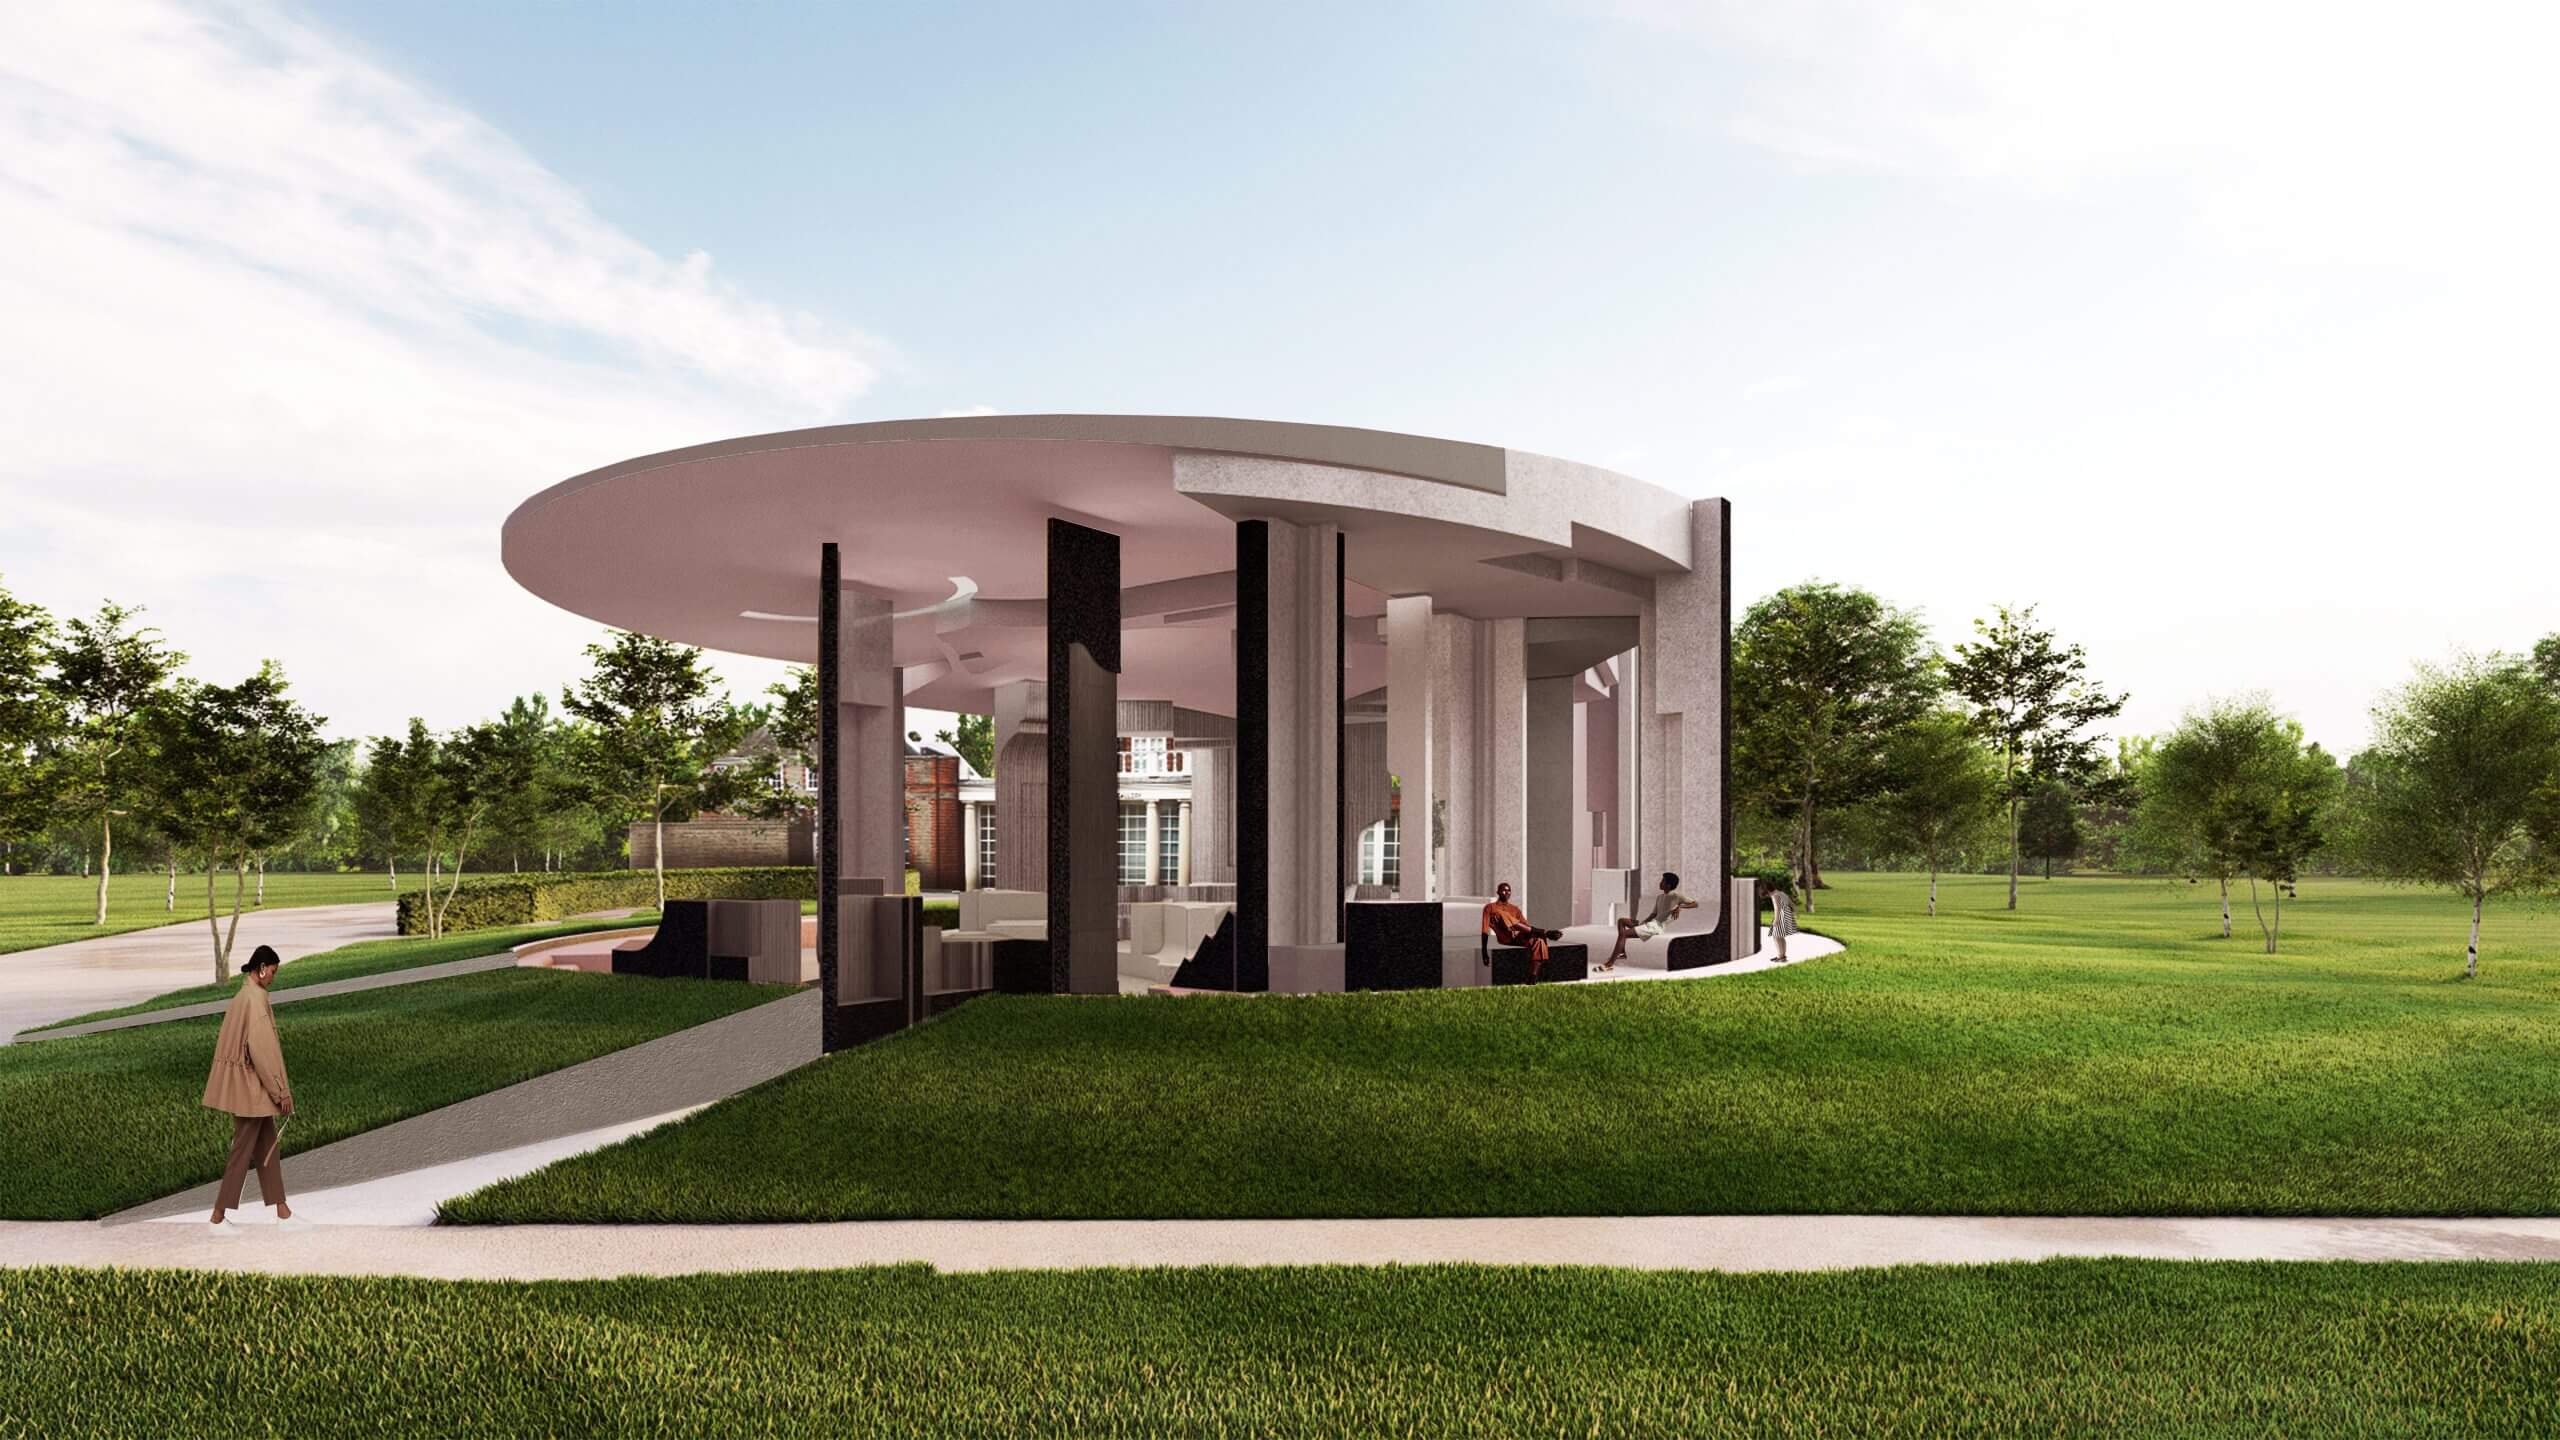 Exterior rendering of a pavilion with flat disc on top